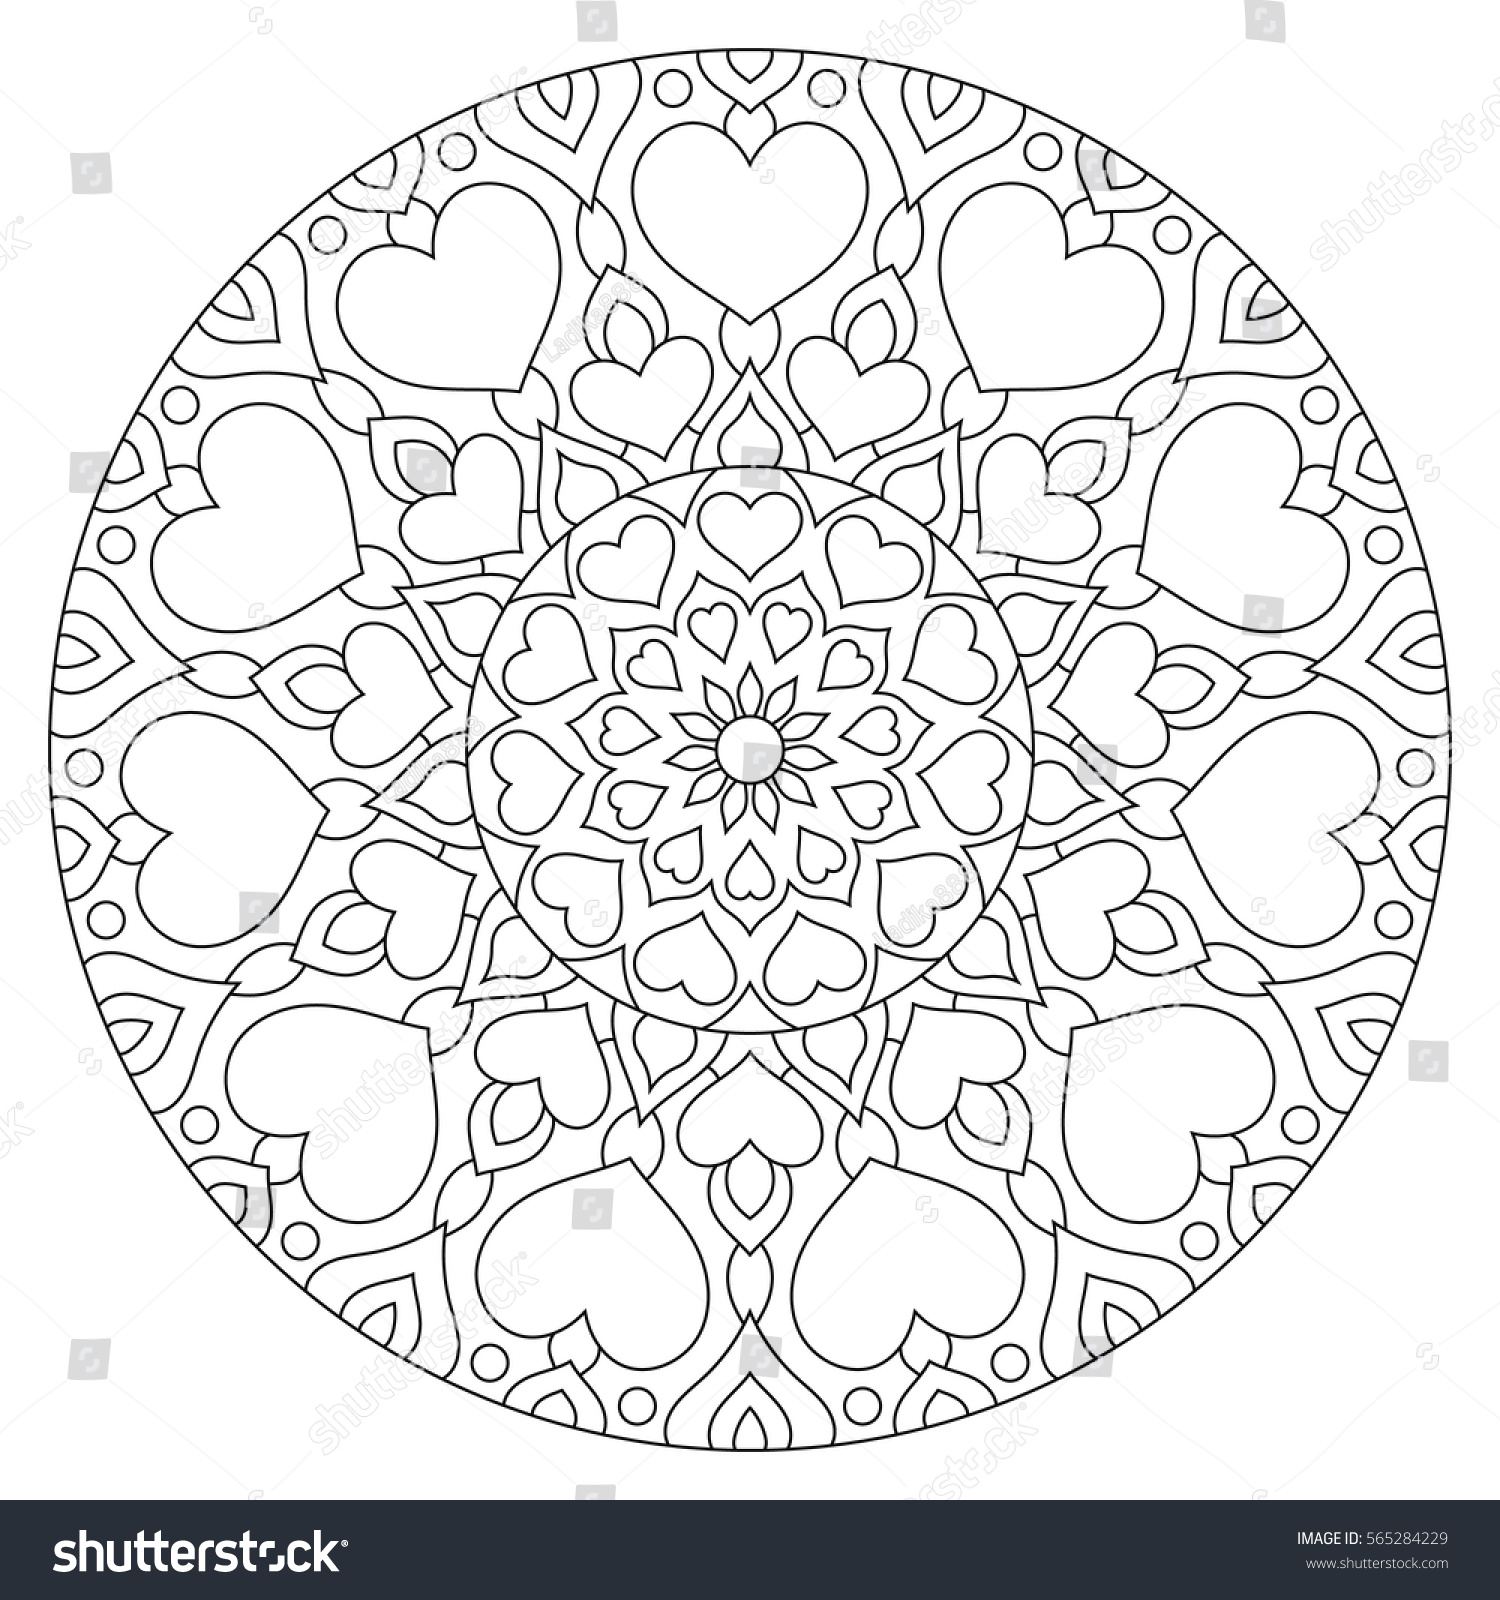 Download Flower Mandala Hearts Coloring Page Valentines Stock ...